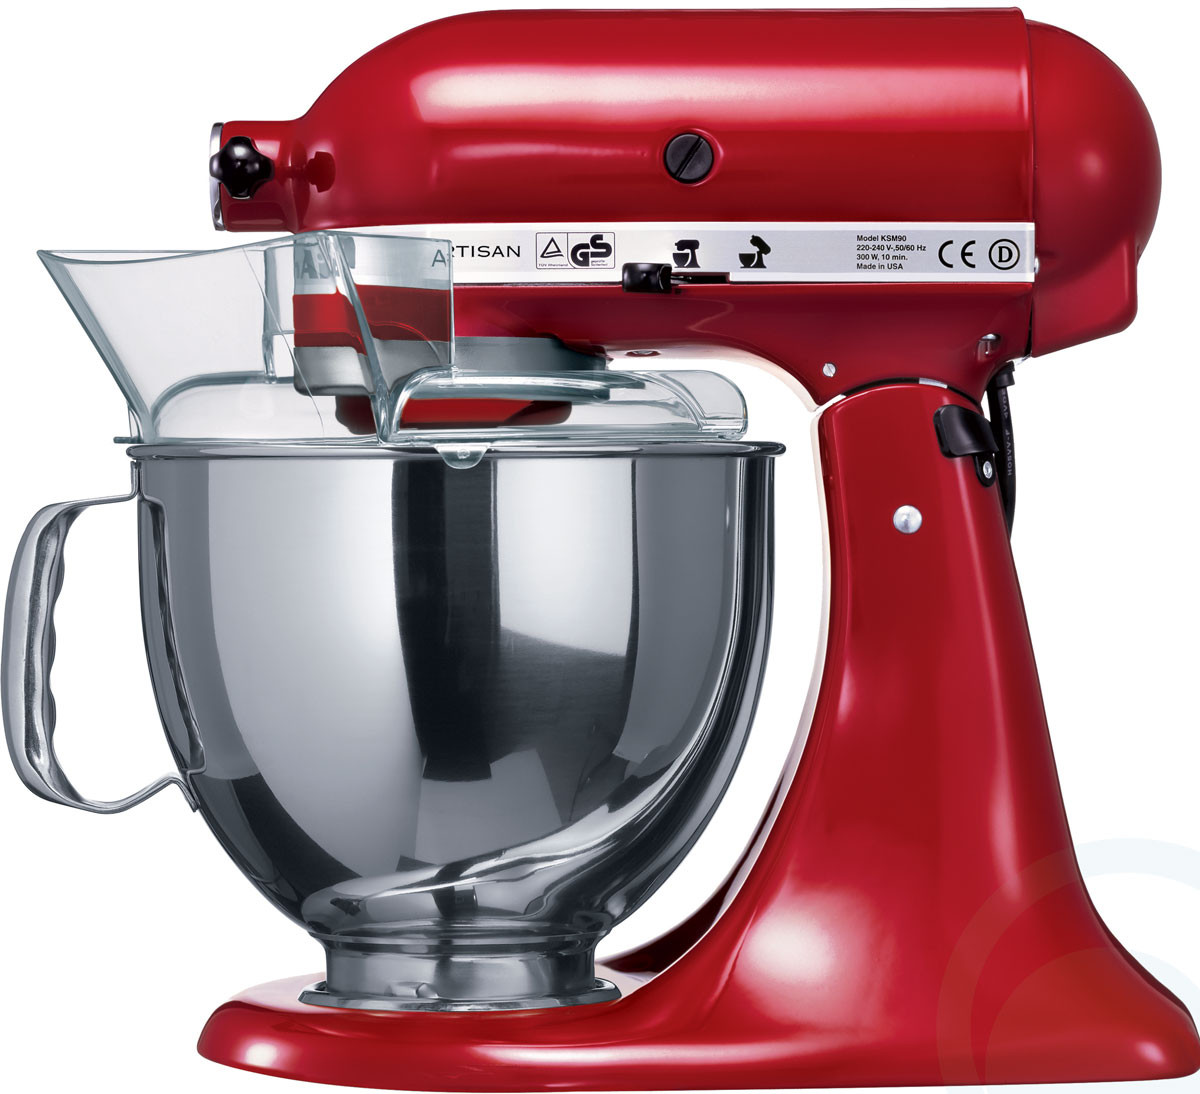 Small Kitchen Aid Mixer
 4 Best Stand Mixers for the Kitchen Appliance Buyer s Guide